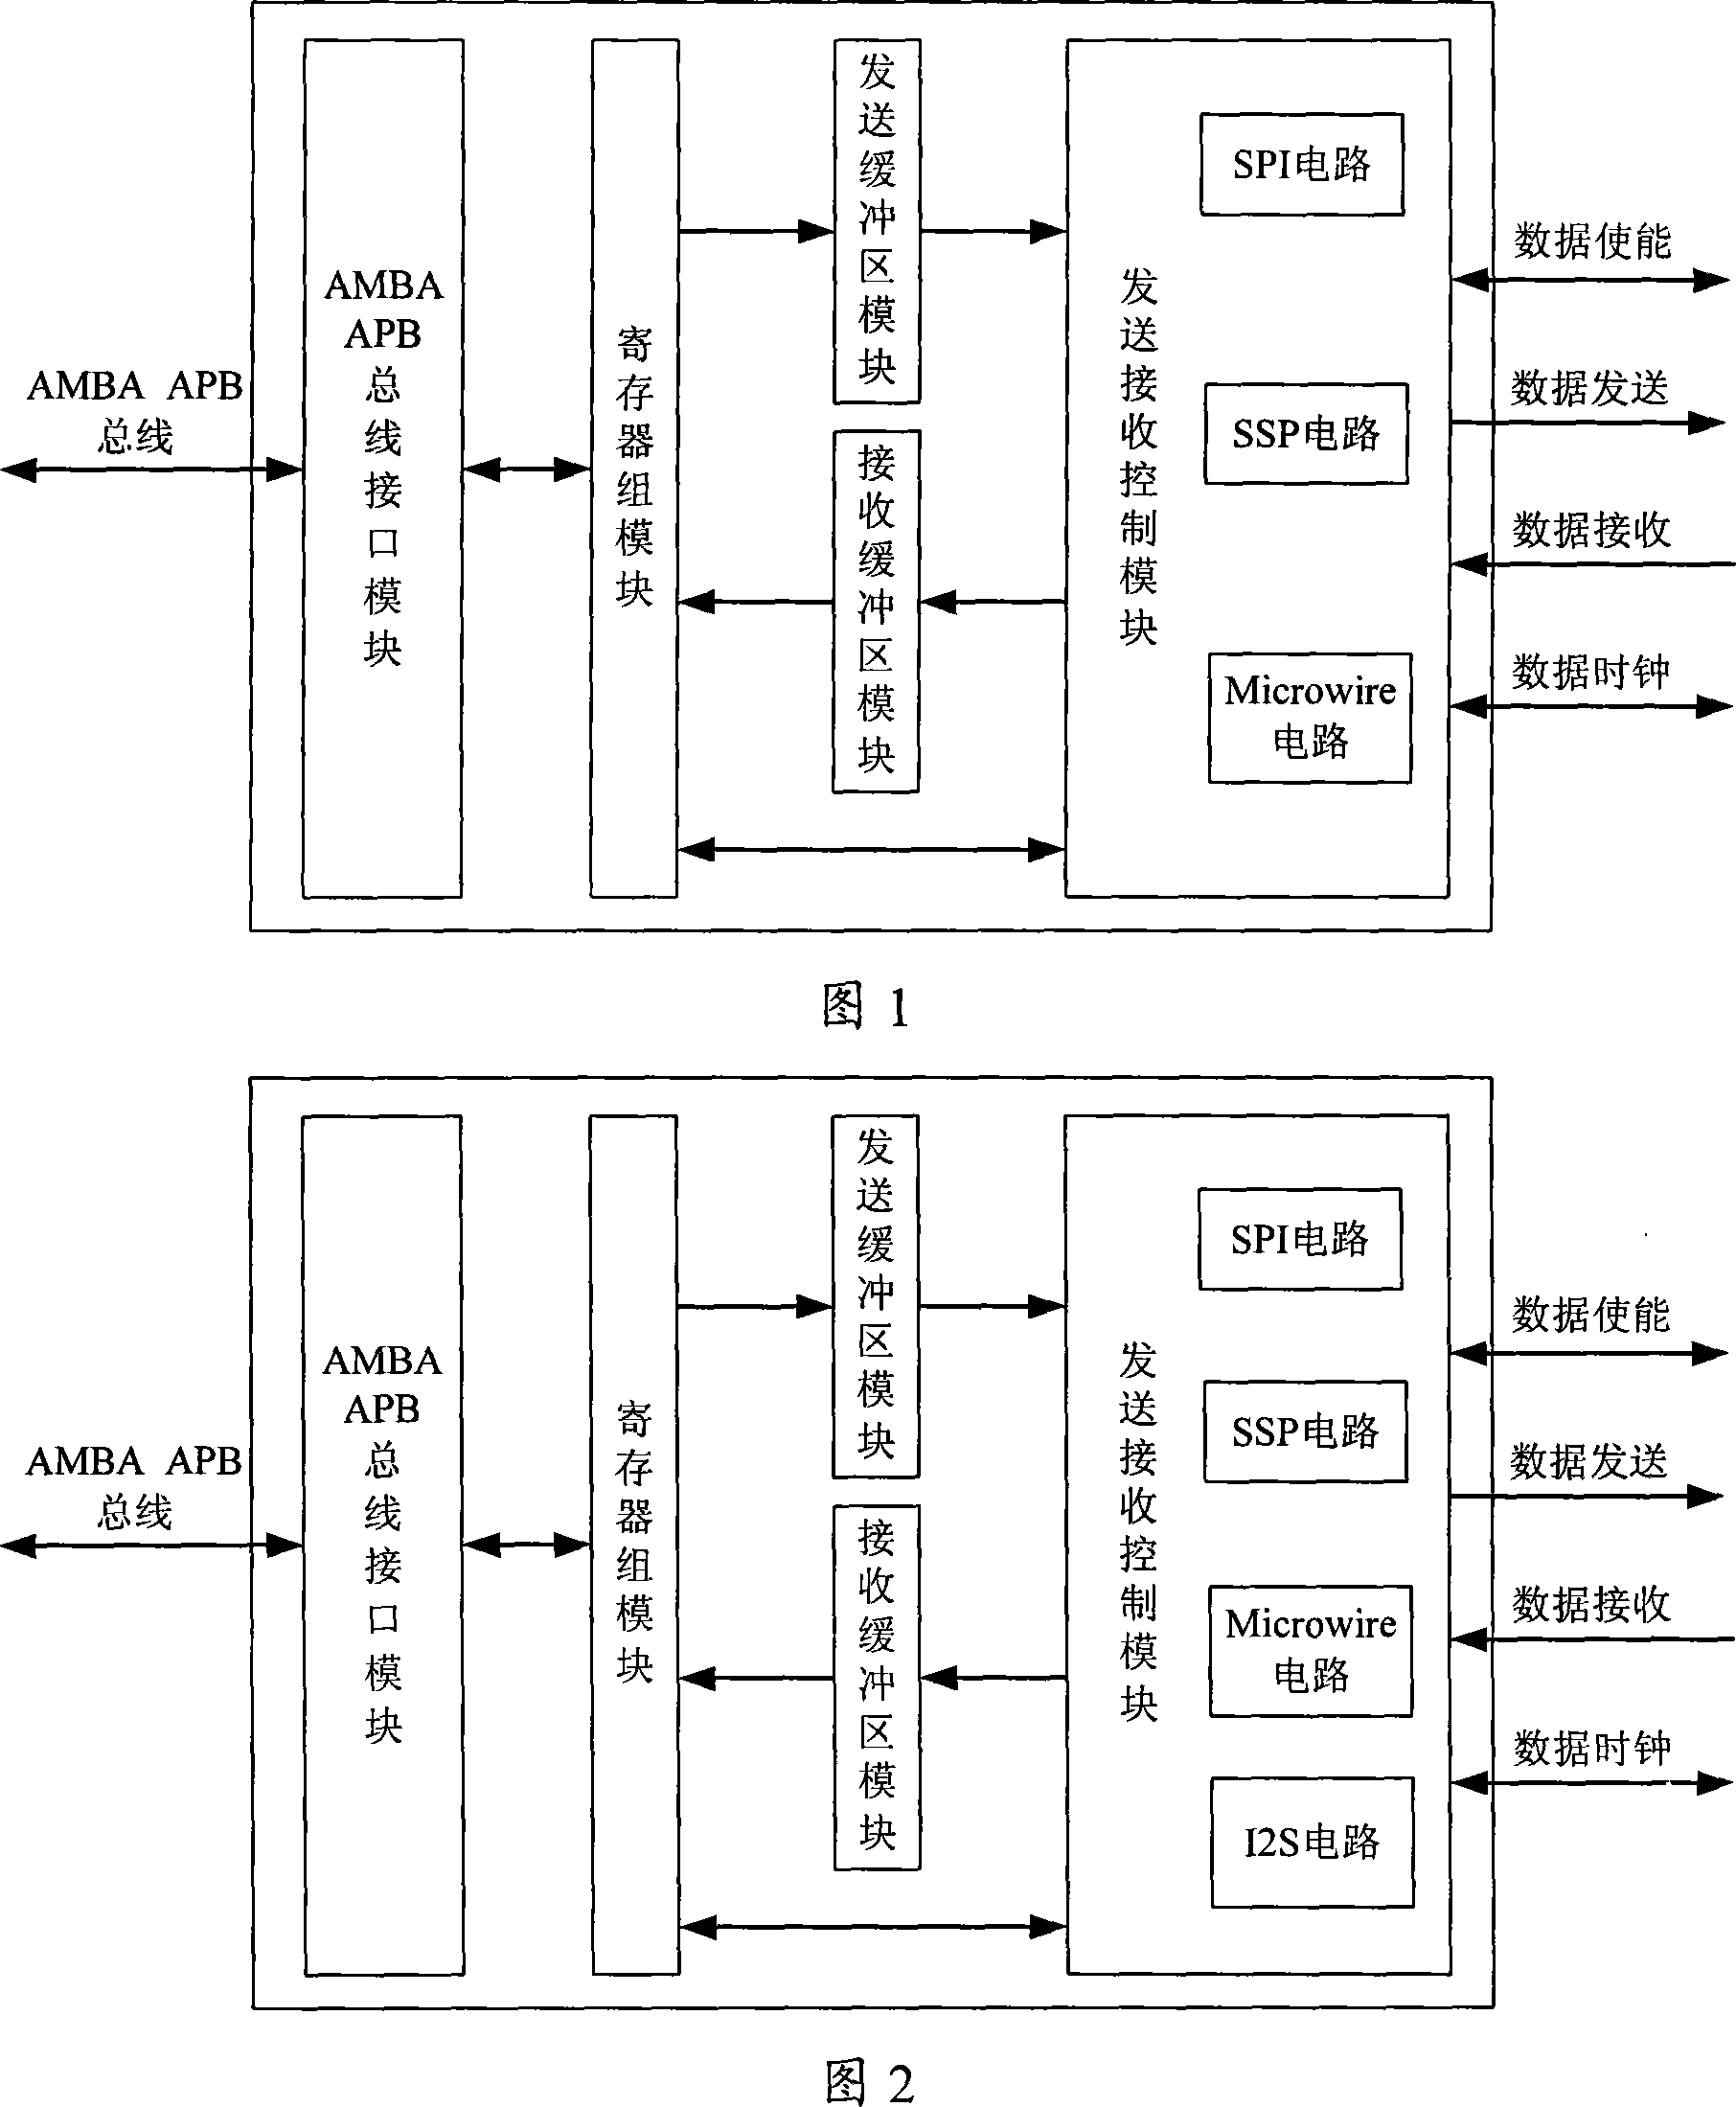 Synchronous serial interface device